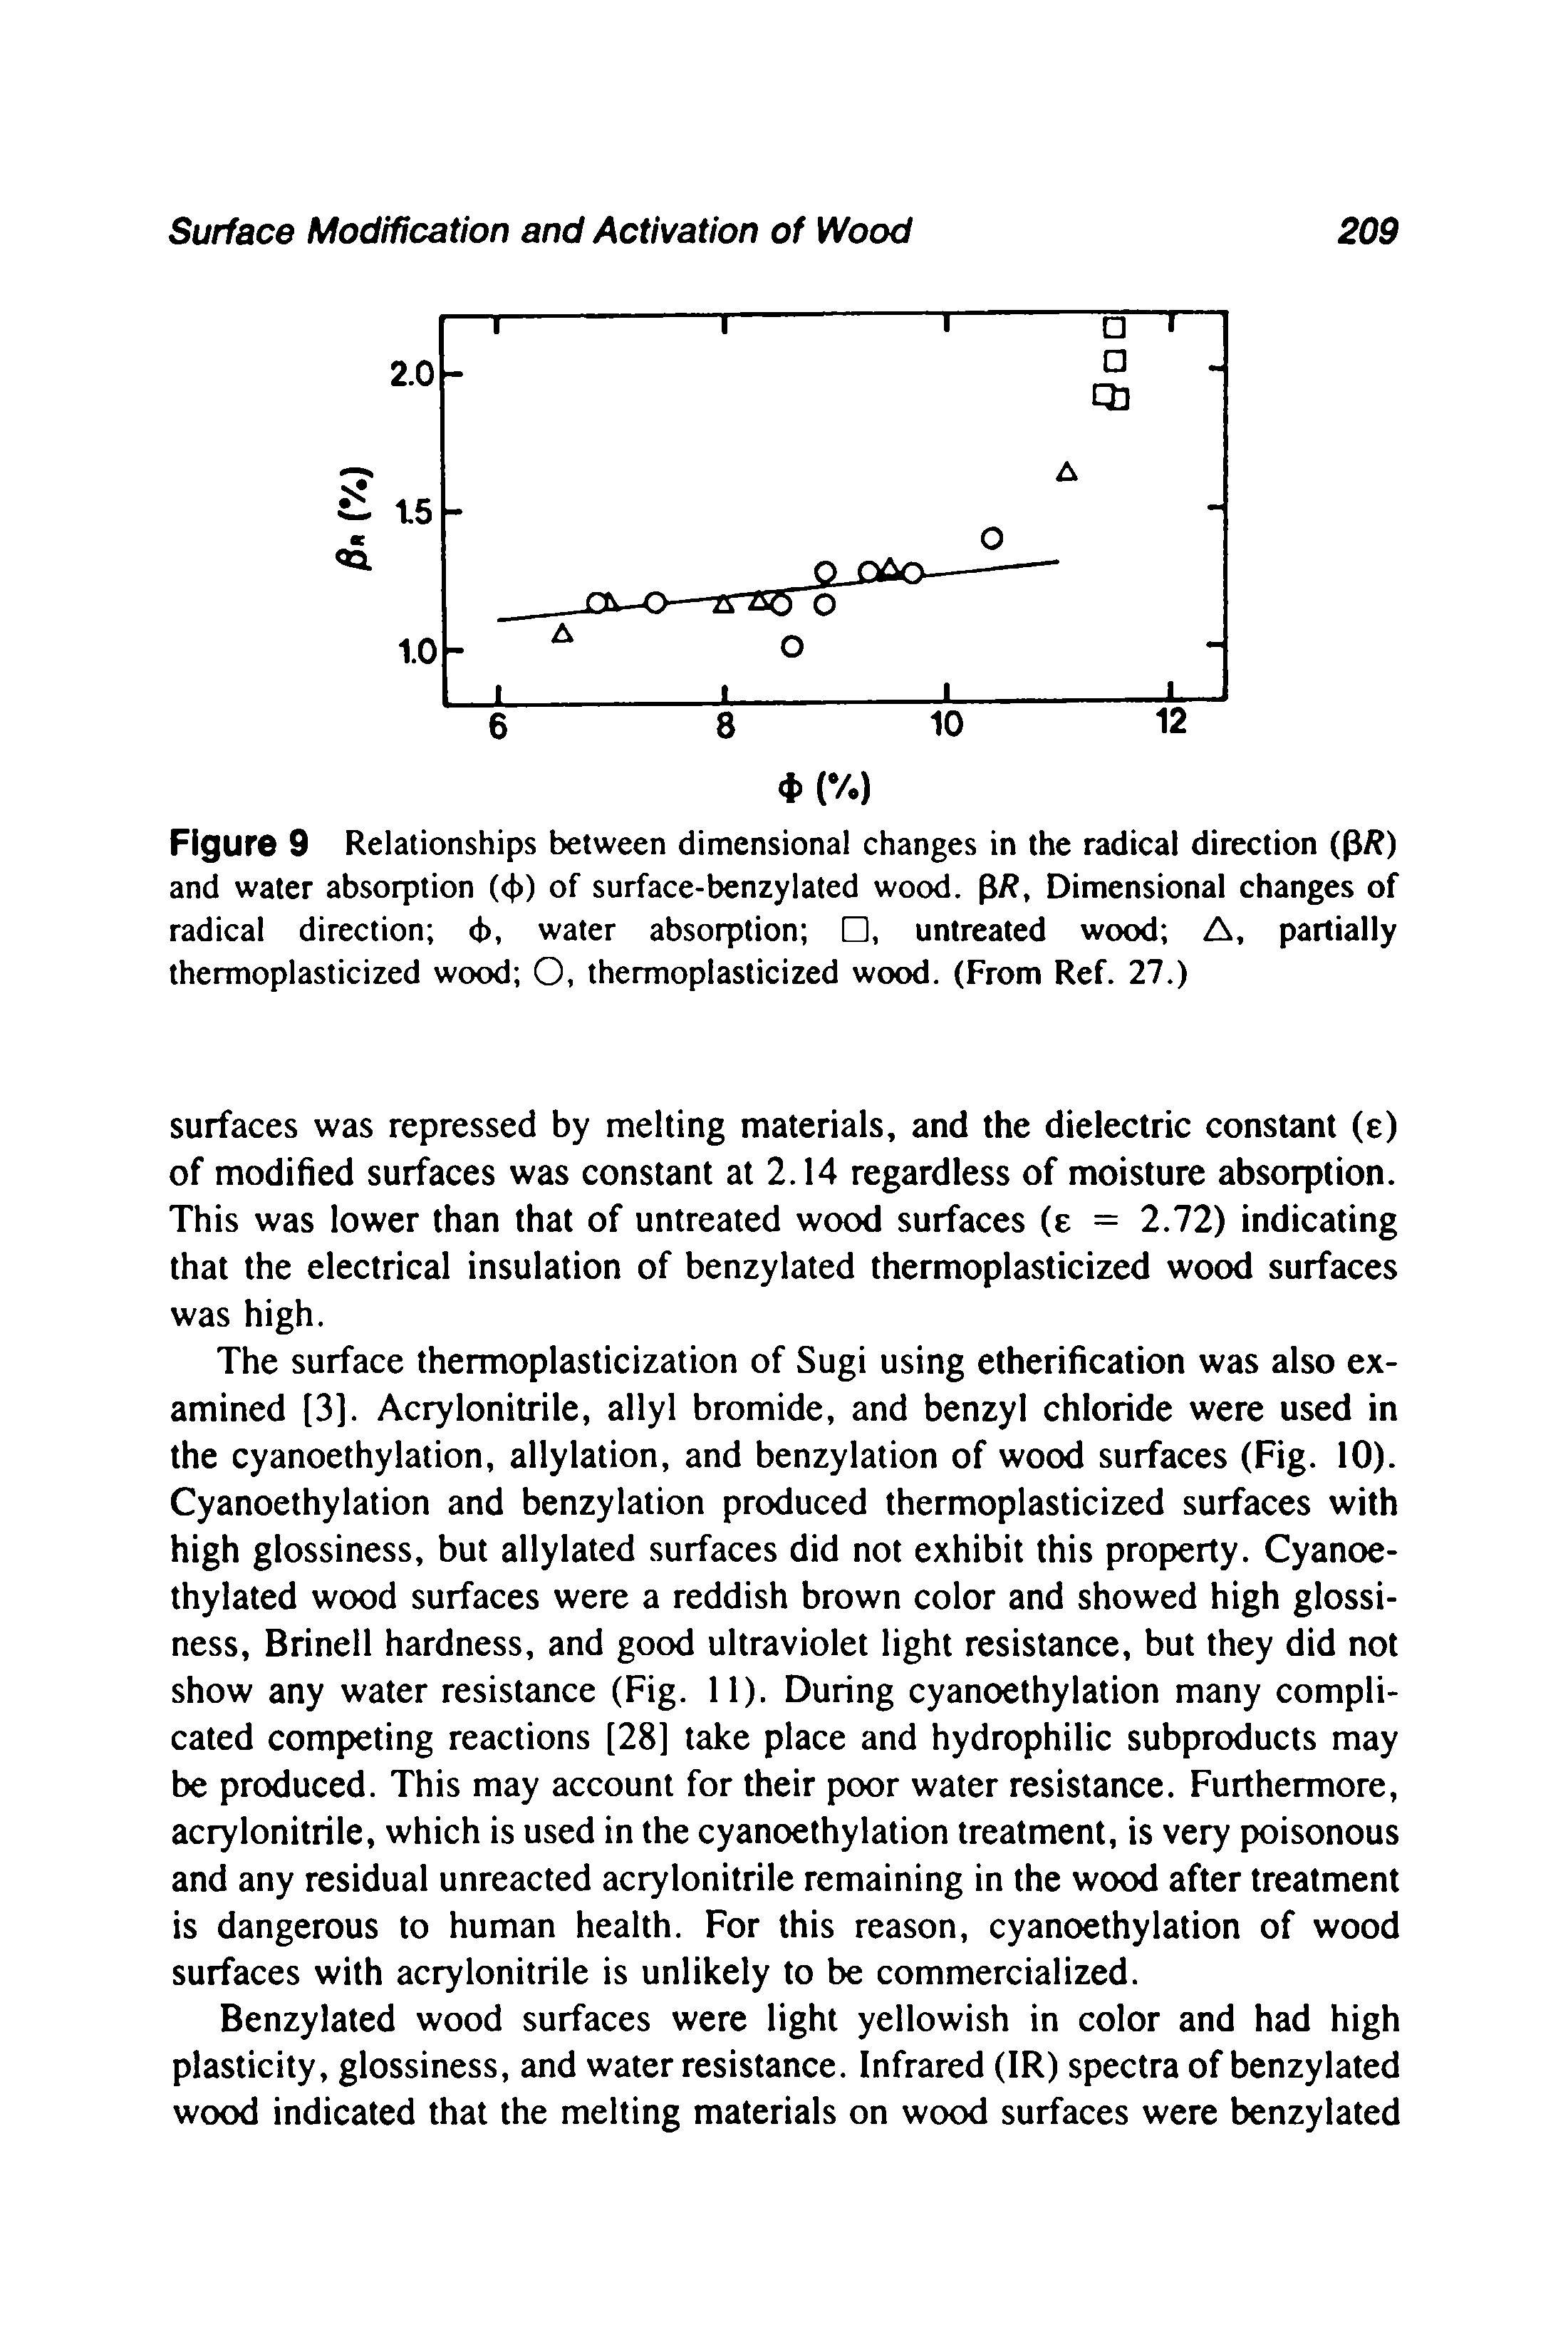 Figure 9 Relationships between dimensional changes in the radical direction (p/ ) and water absorption (< )) of surface-benzylated wood. pR, Dimensional changes of radical direction 6, water absorption , untreated wood A, partially thermoplasticized wood O, thermoplasticized wood. (From Ref. 27.)...